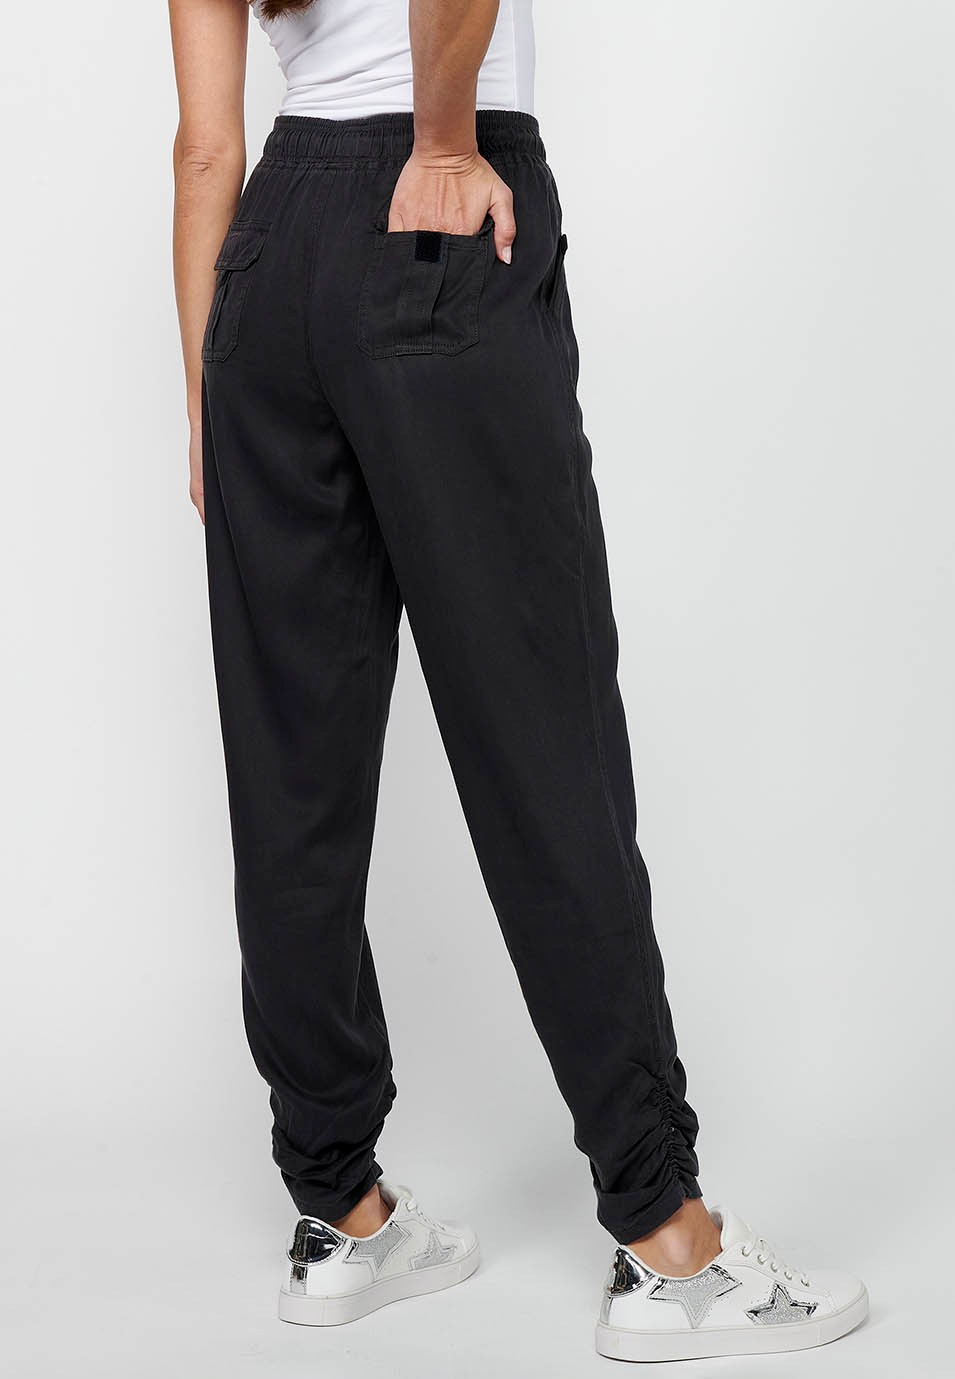 Long jogger pants with curled finish and rubberized waist with four pockets, two at the back with flap in Black for Women 1